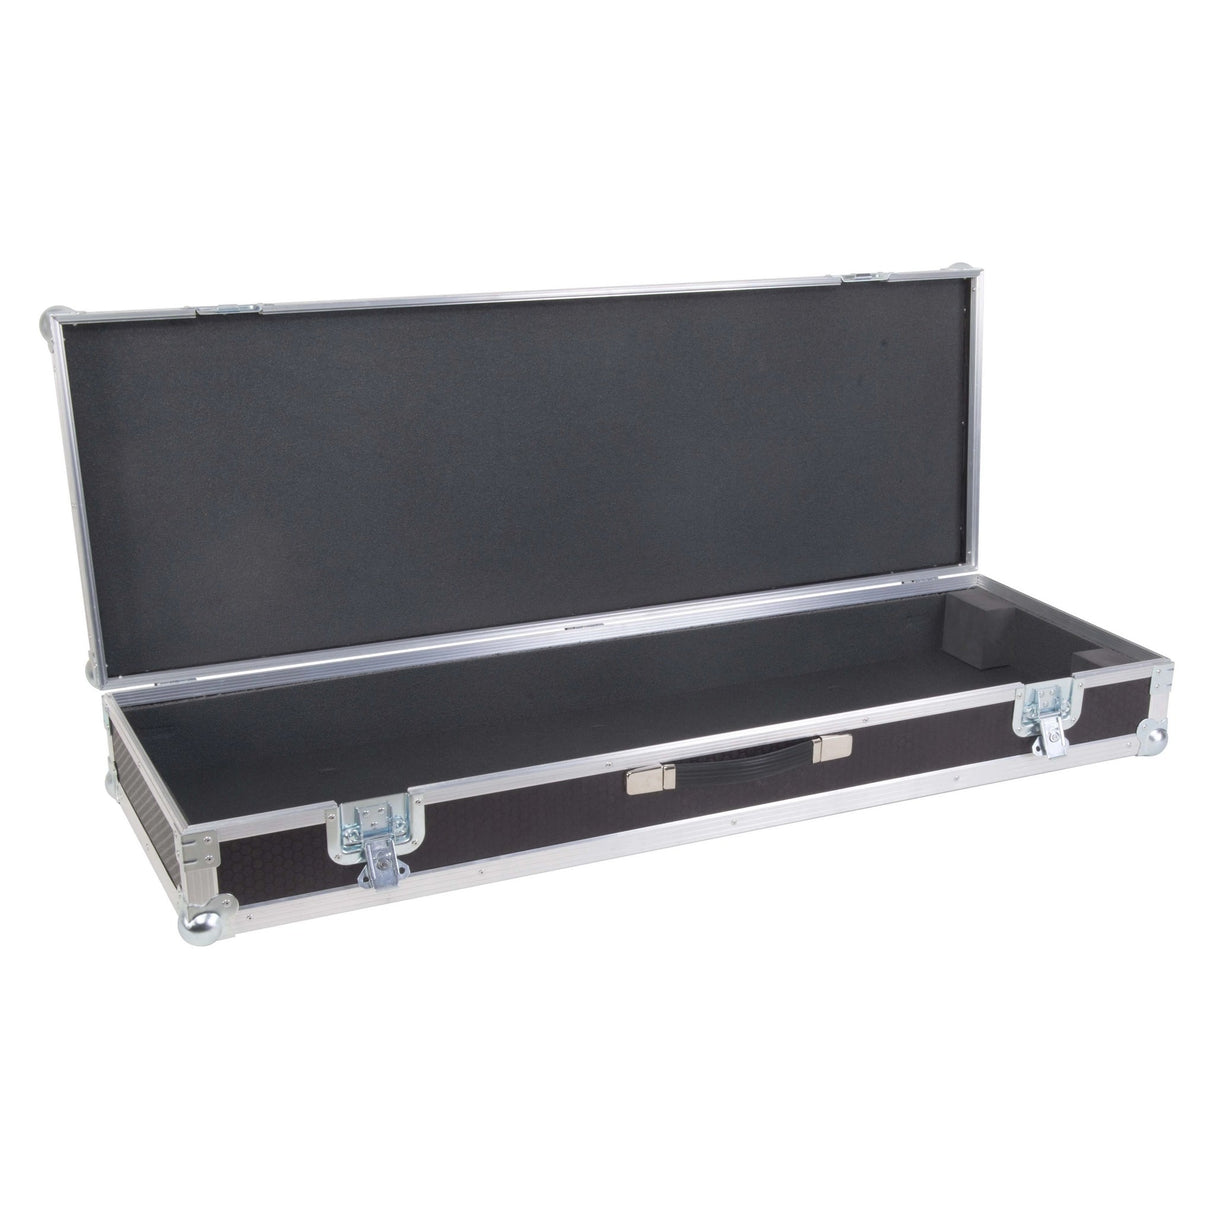 Dexibell DX CASE73 Wood Keyboard Touring Case for 73-Key Digital Pianos